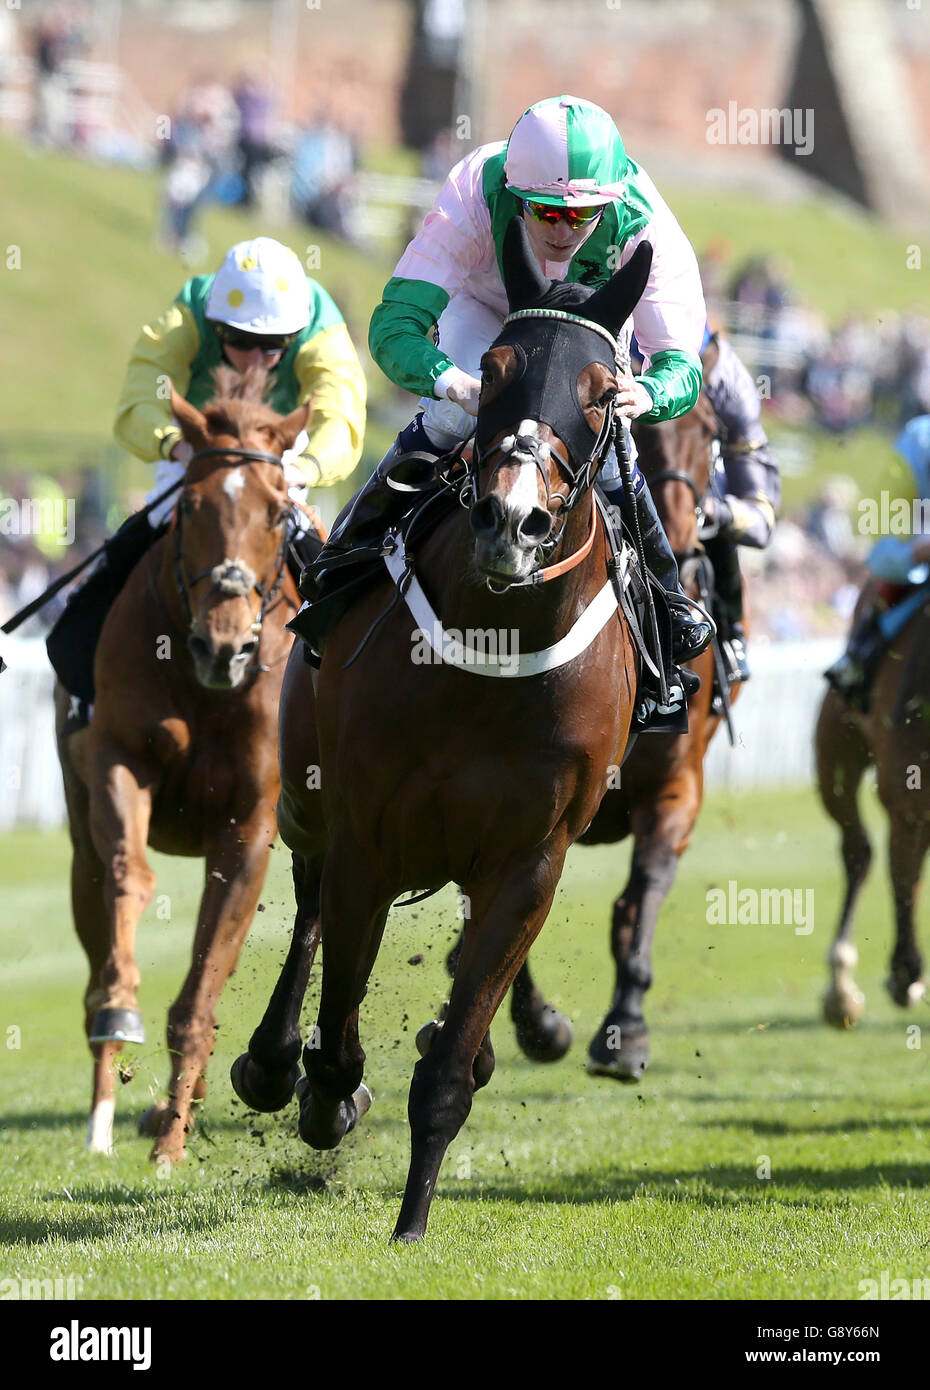 Chester Races - Day One - Betway Chester Cup Day - Boodles May Festival Stock Photo